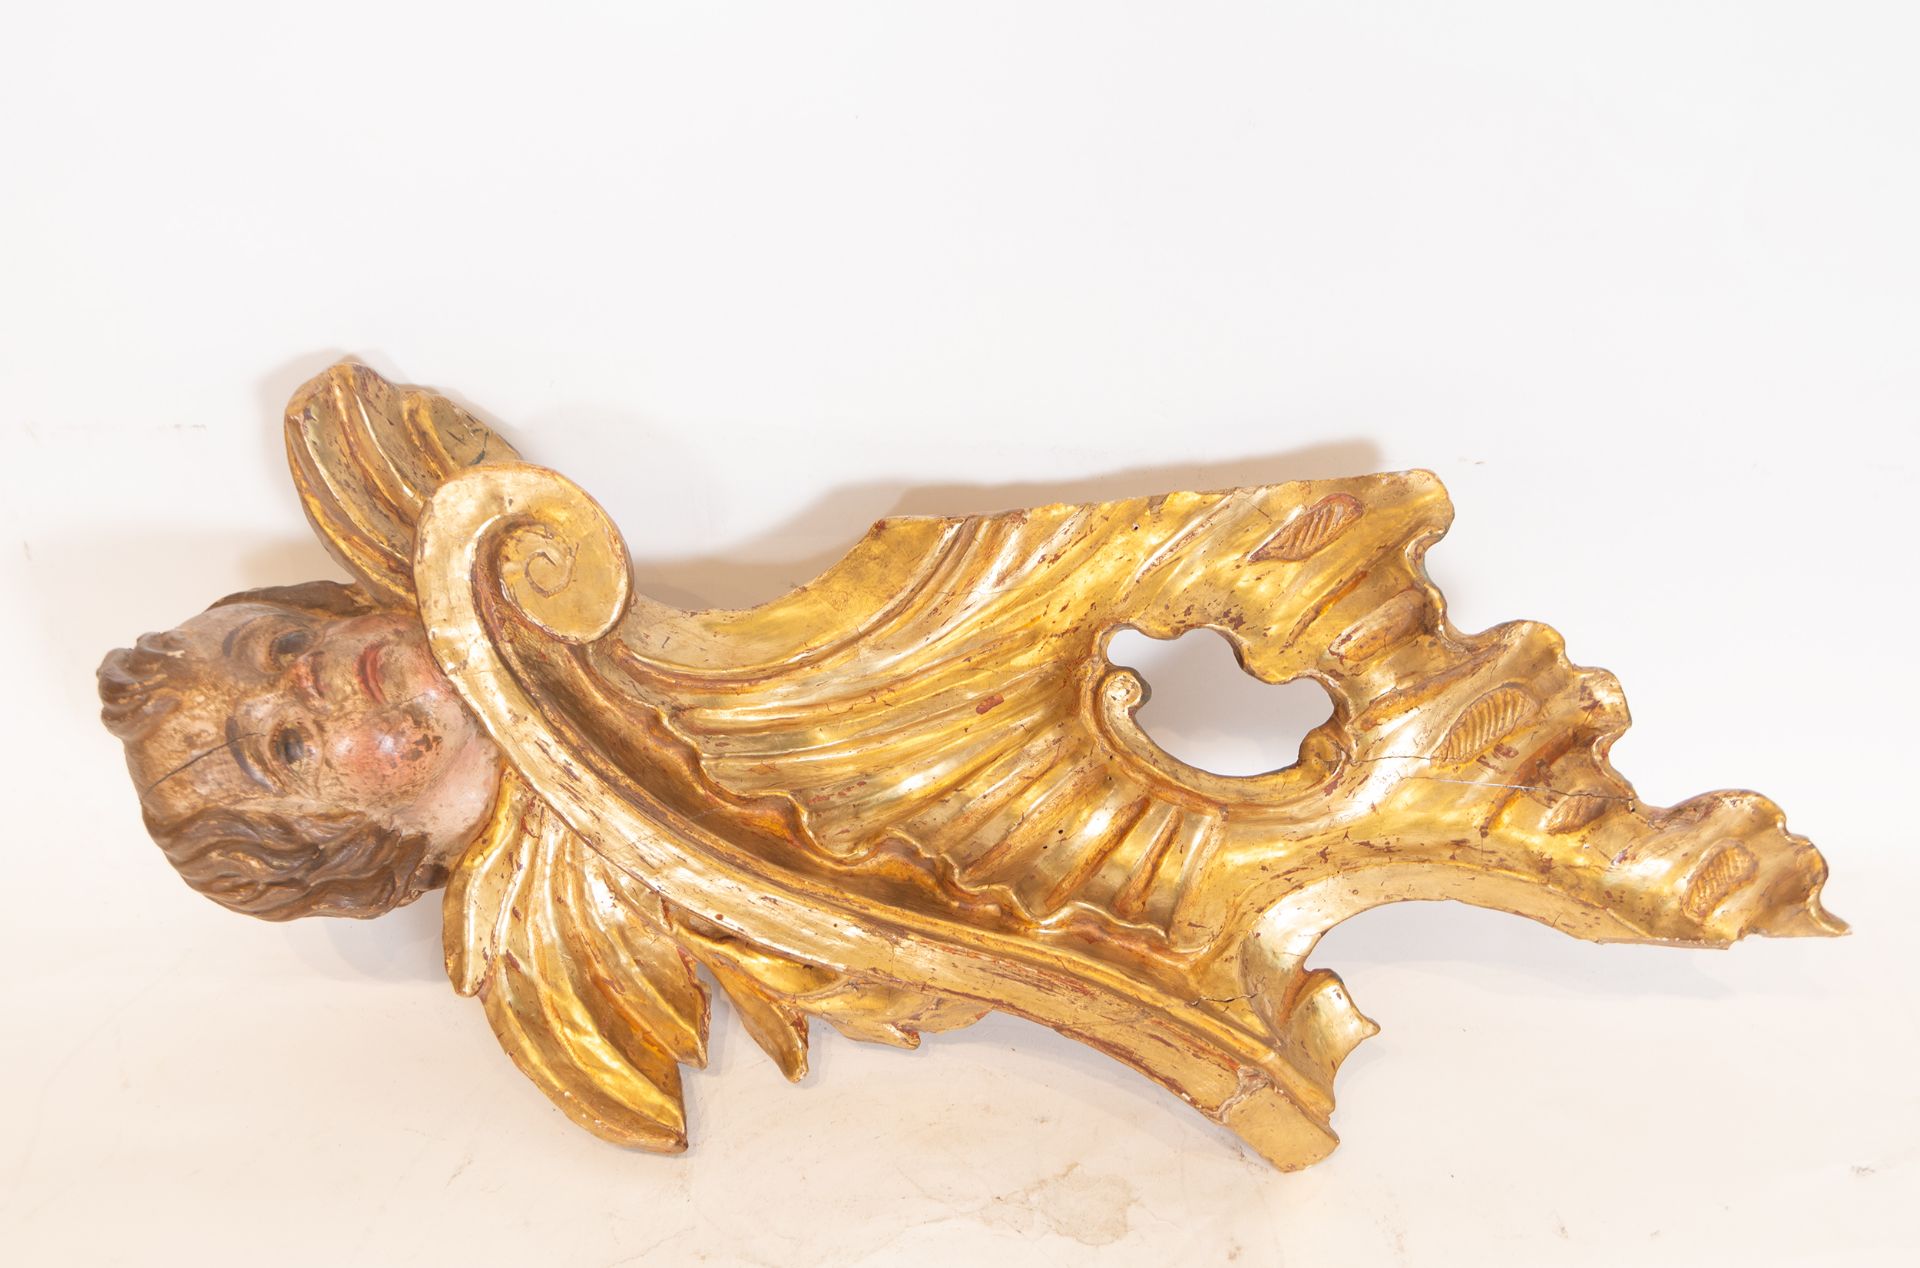 Pair of Rococo Wall Lamps in the shape of Angels, Andalusian school from the end of the 17th century - Bild 2 aus 3